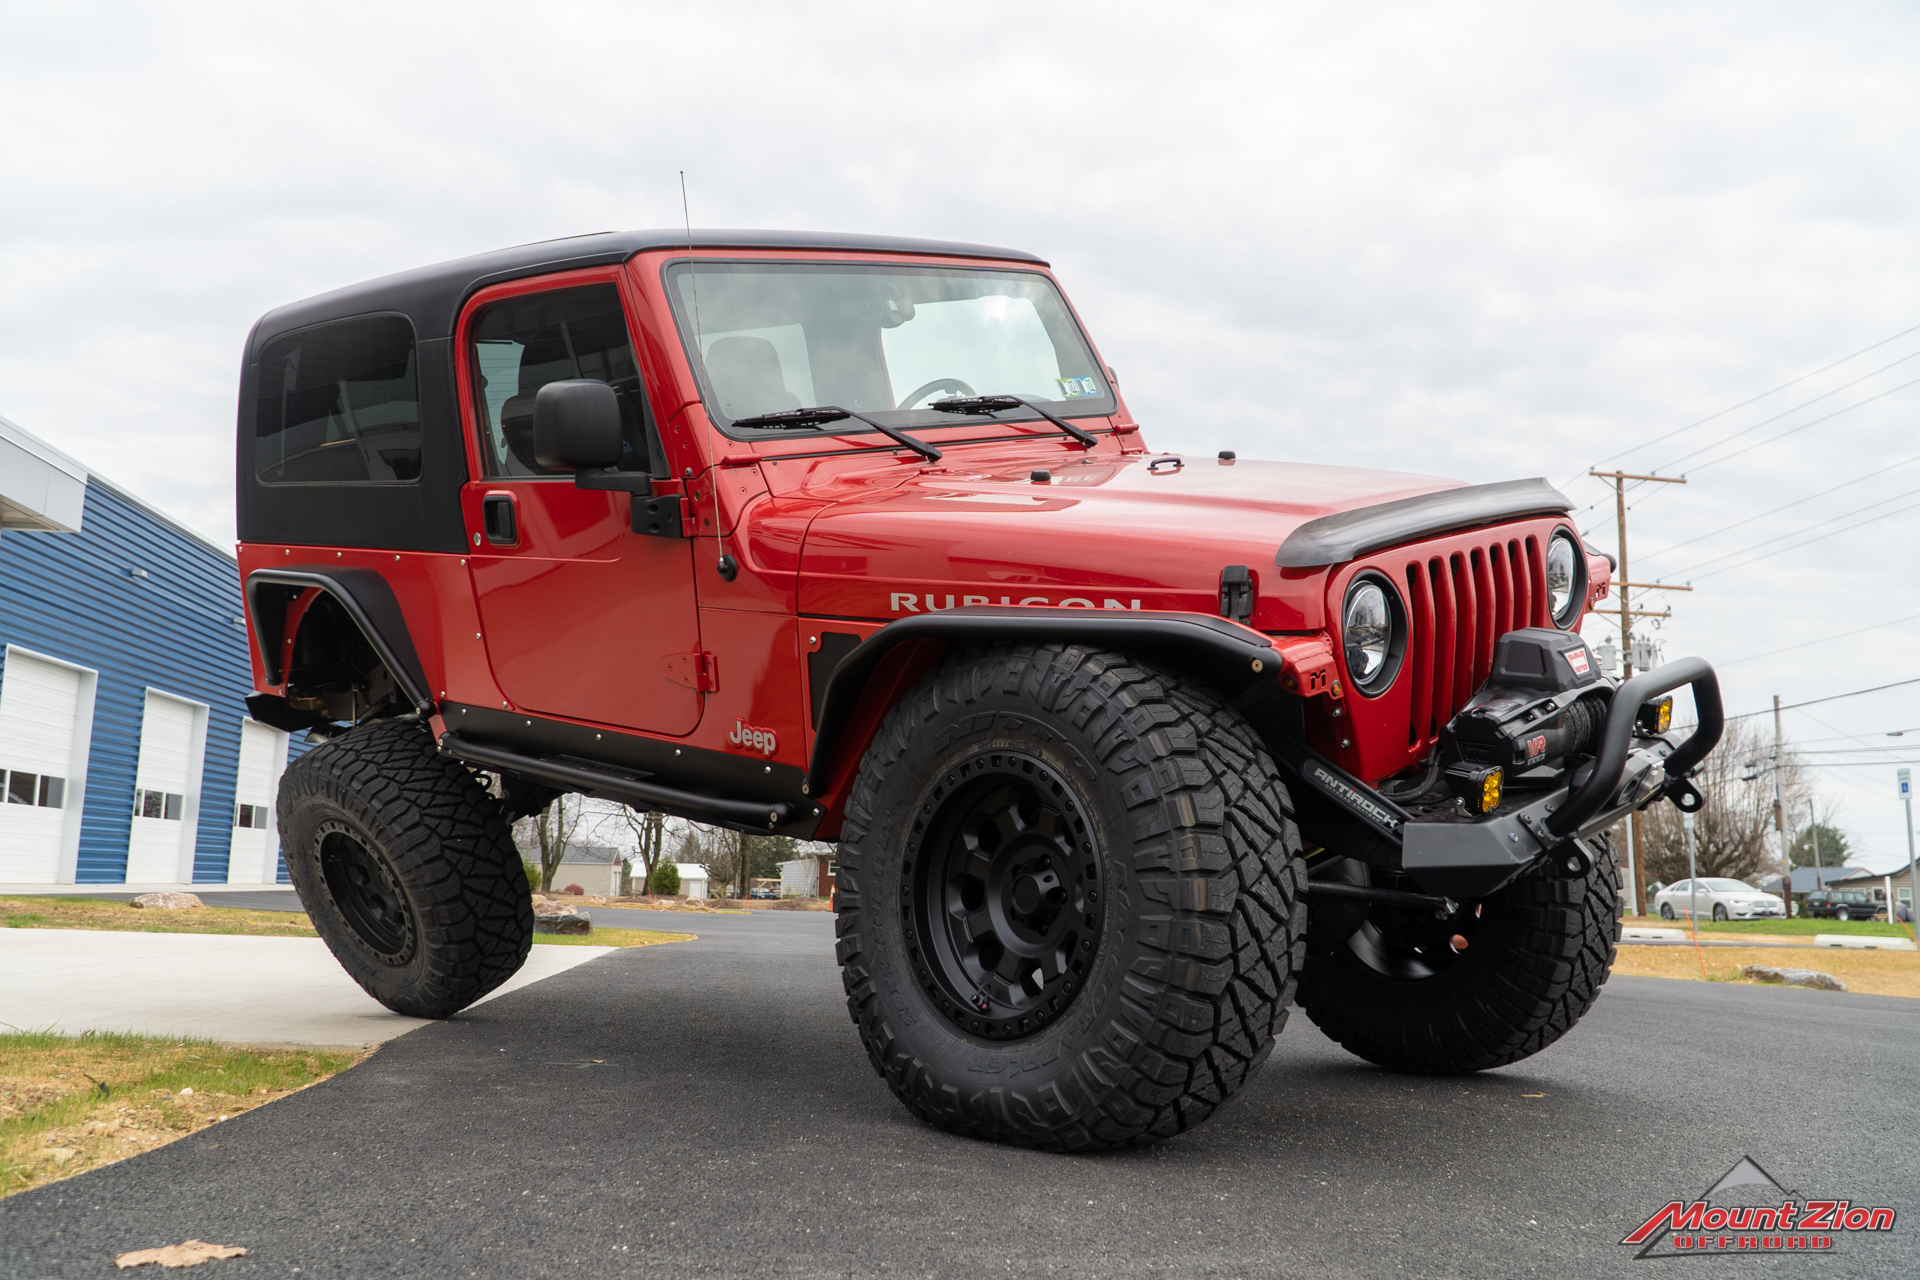 2005 Jeep Wrangler Unlimited Rubicon - Mount Zion Offroad